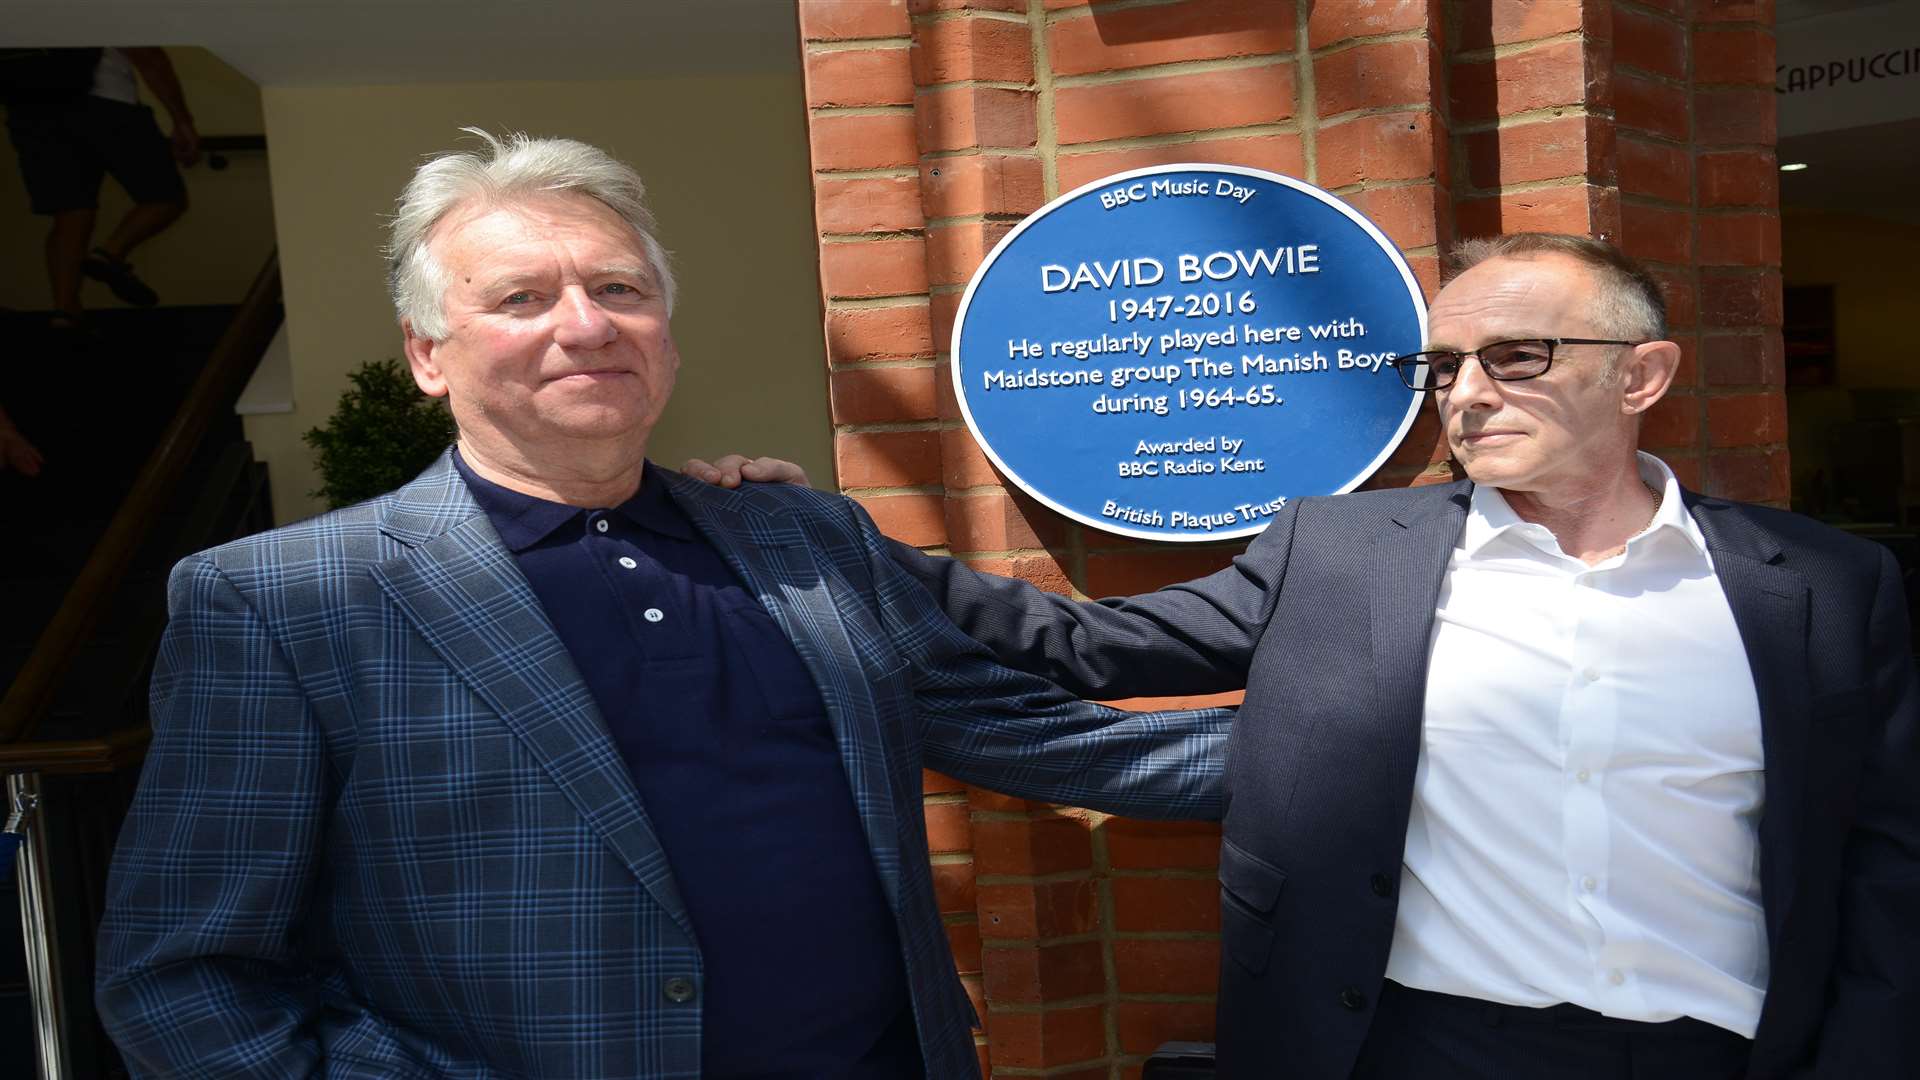 Bob Solly and Topper Headon, former drummer with The Clash, unveiling of the blue plaque to David Bowie who played with the Manish Boys at the Royal Star Hotel in Maidstone.